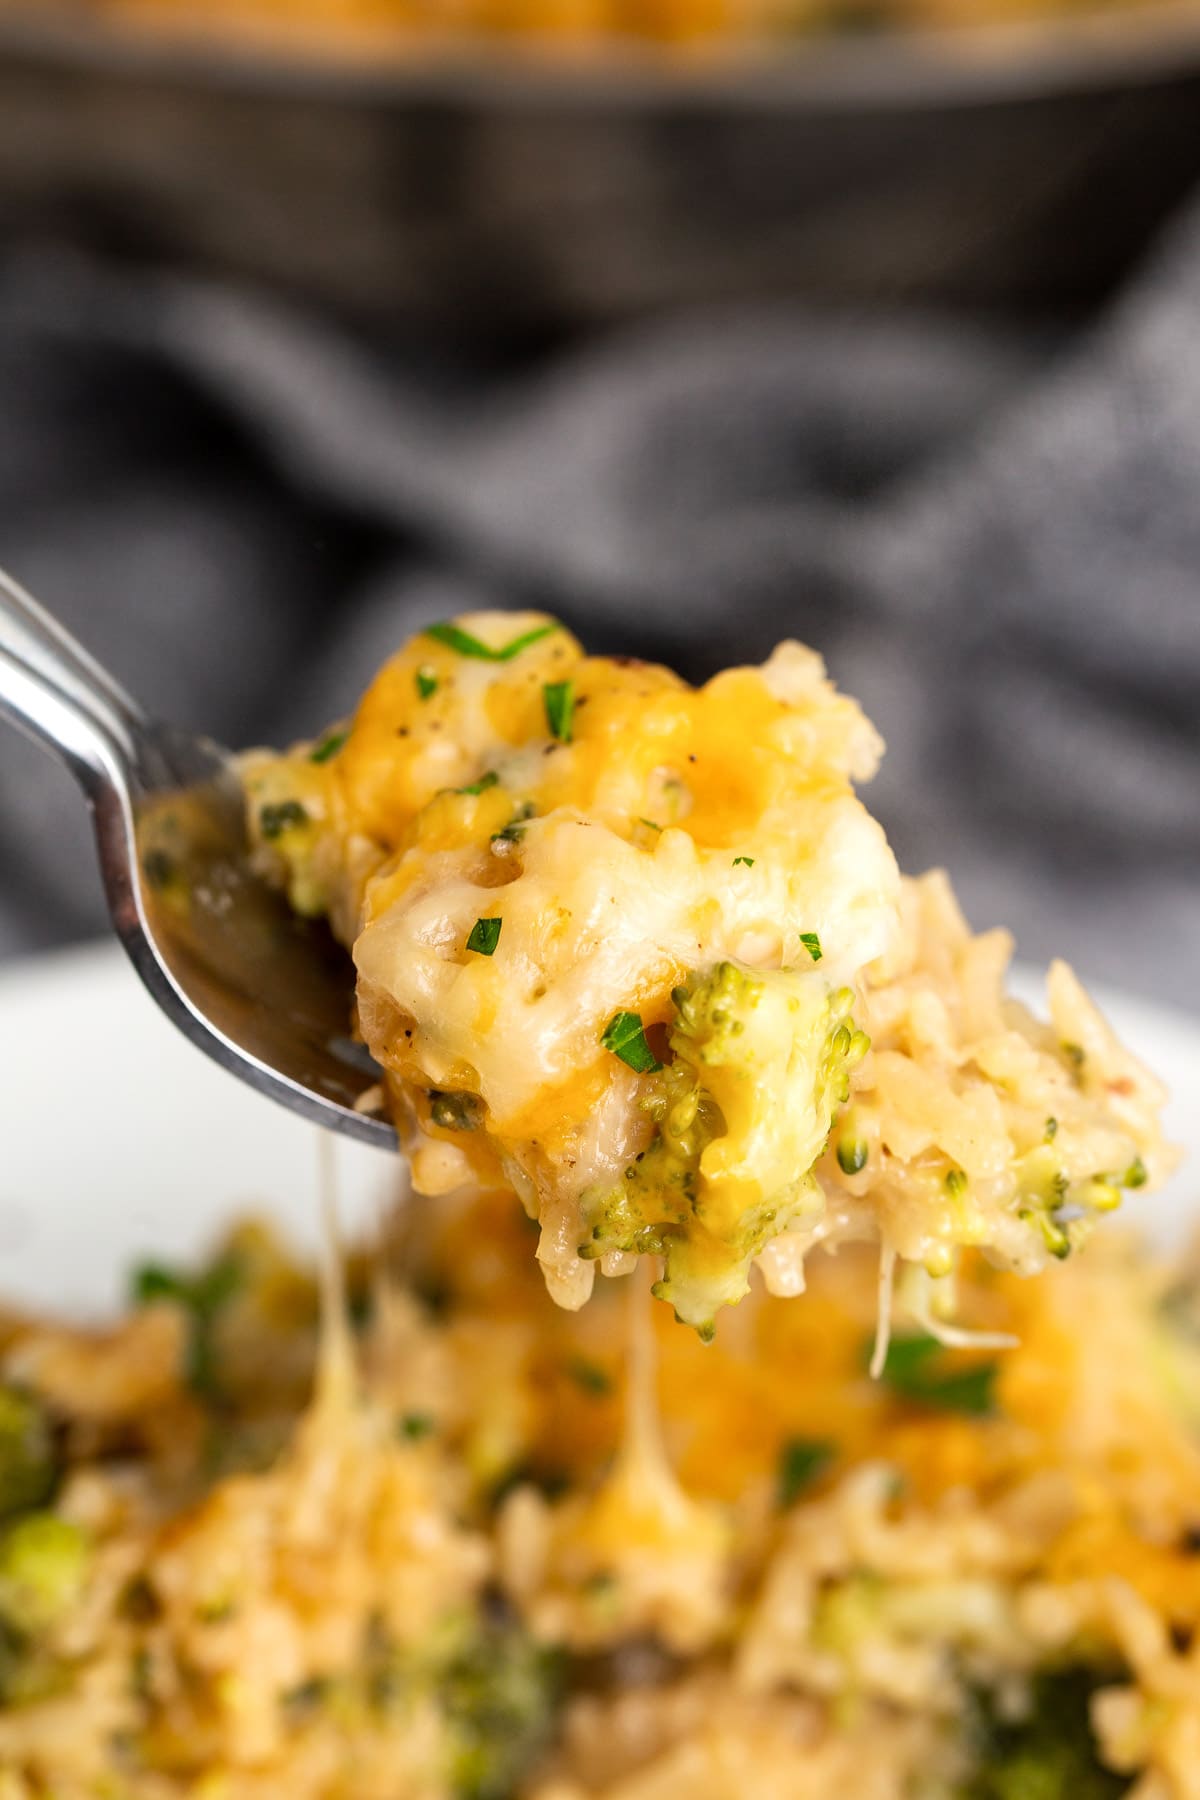 A forkful of chicken broccoli rice casserole with lots of cheese.